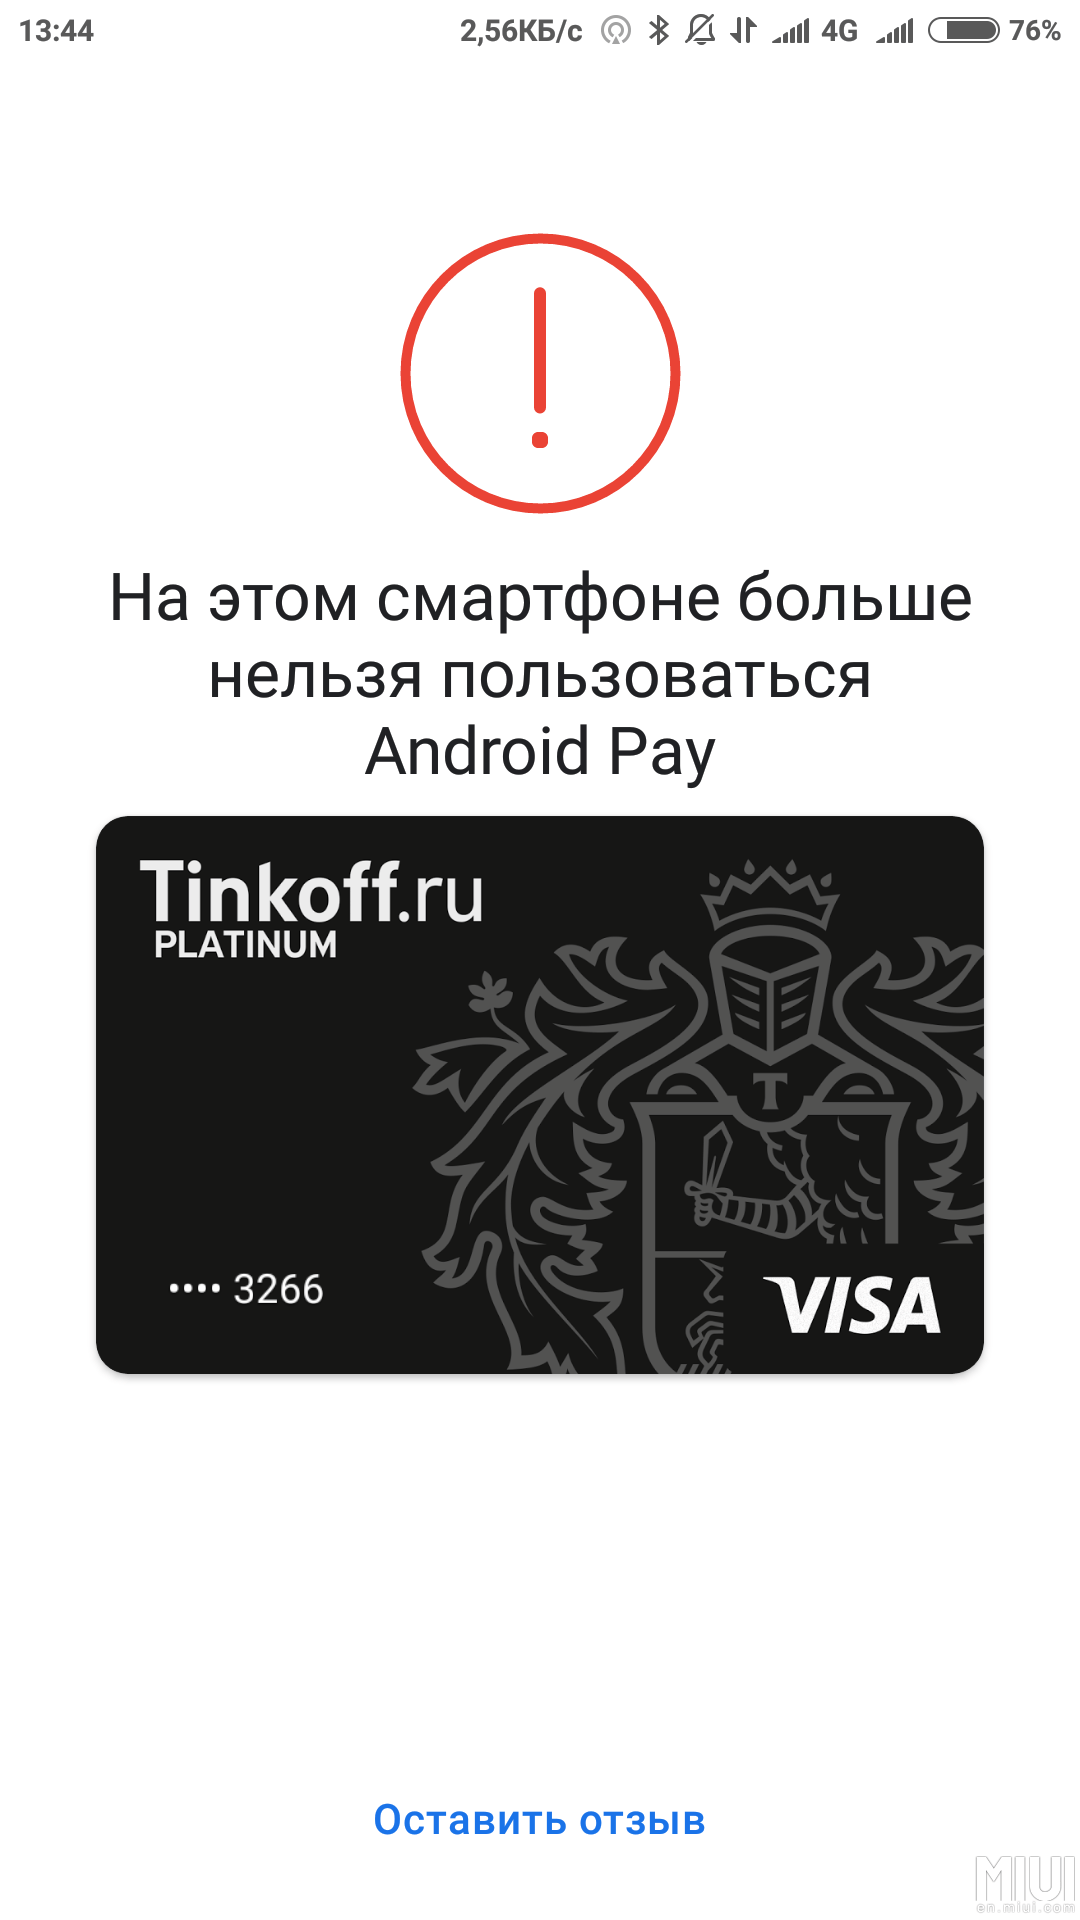 Official Android Pay Logo - Android Pay Not Working Mi 5 Pro MIUI Official Forum